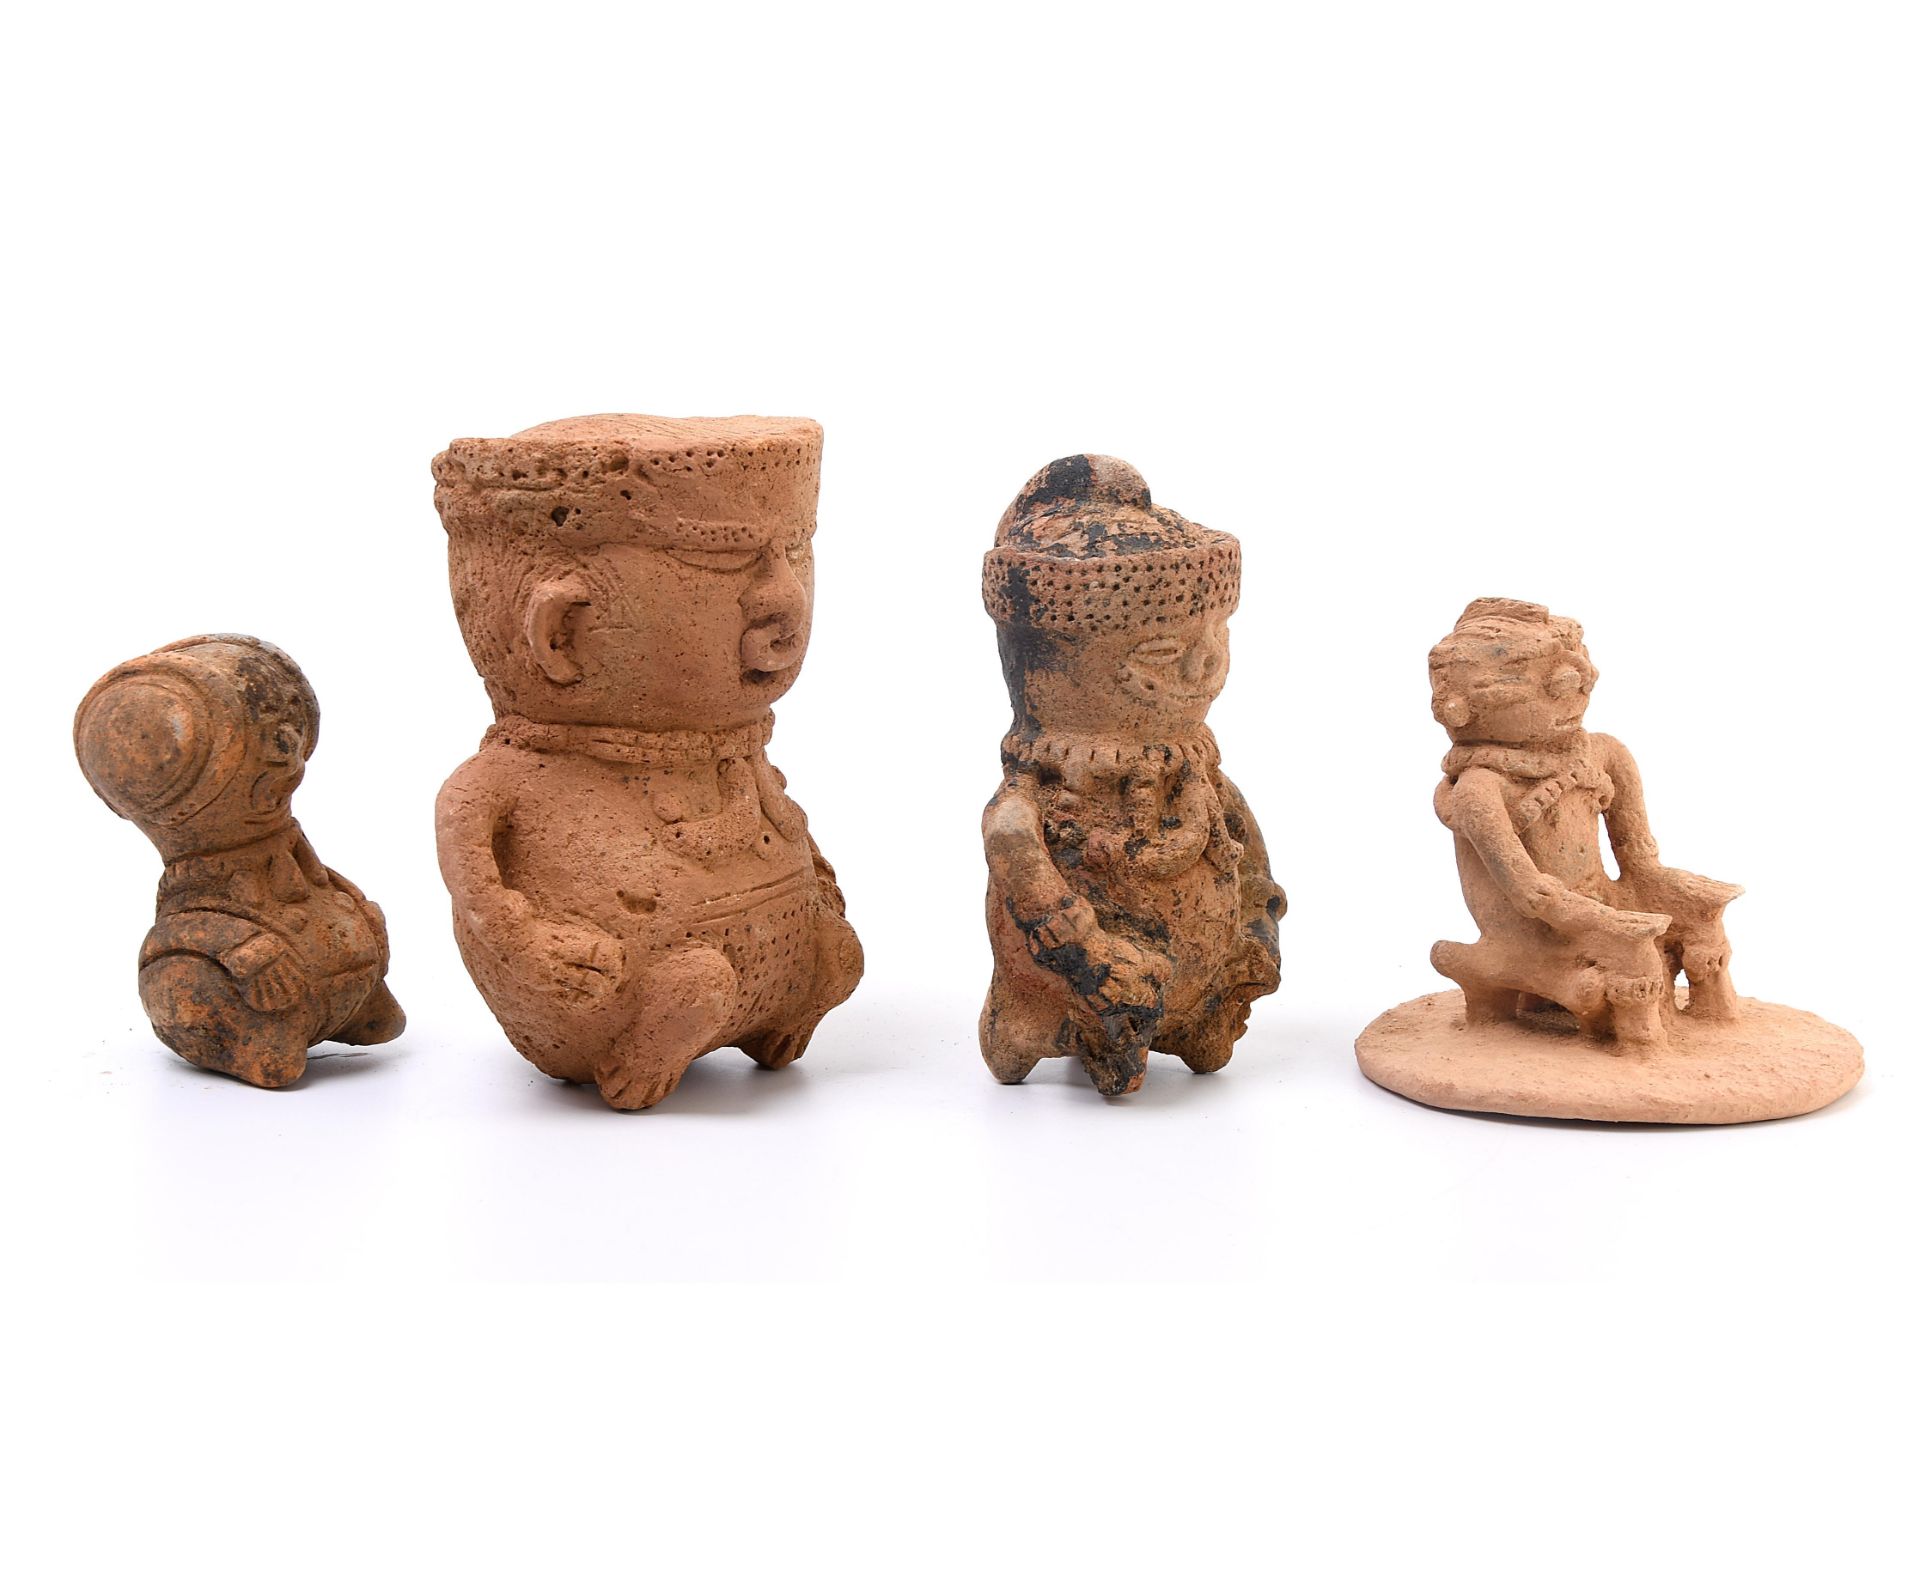 Colombia, Sinu region, four terracotta figures, ca. 1200-1400 AD. - Image 3 of 4